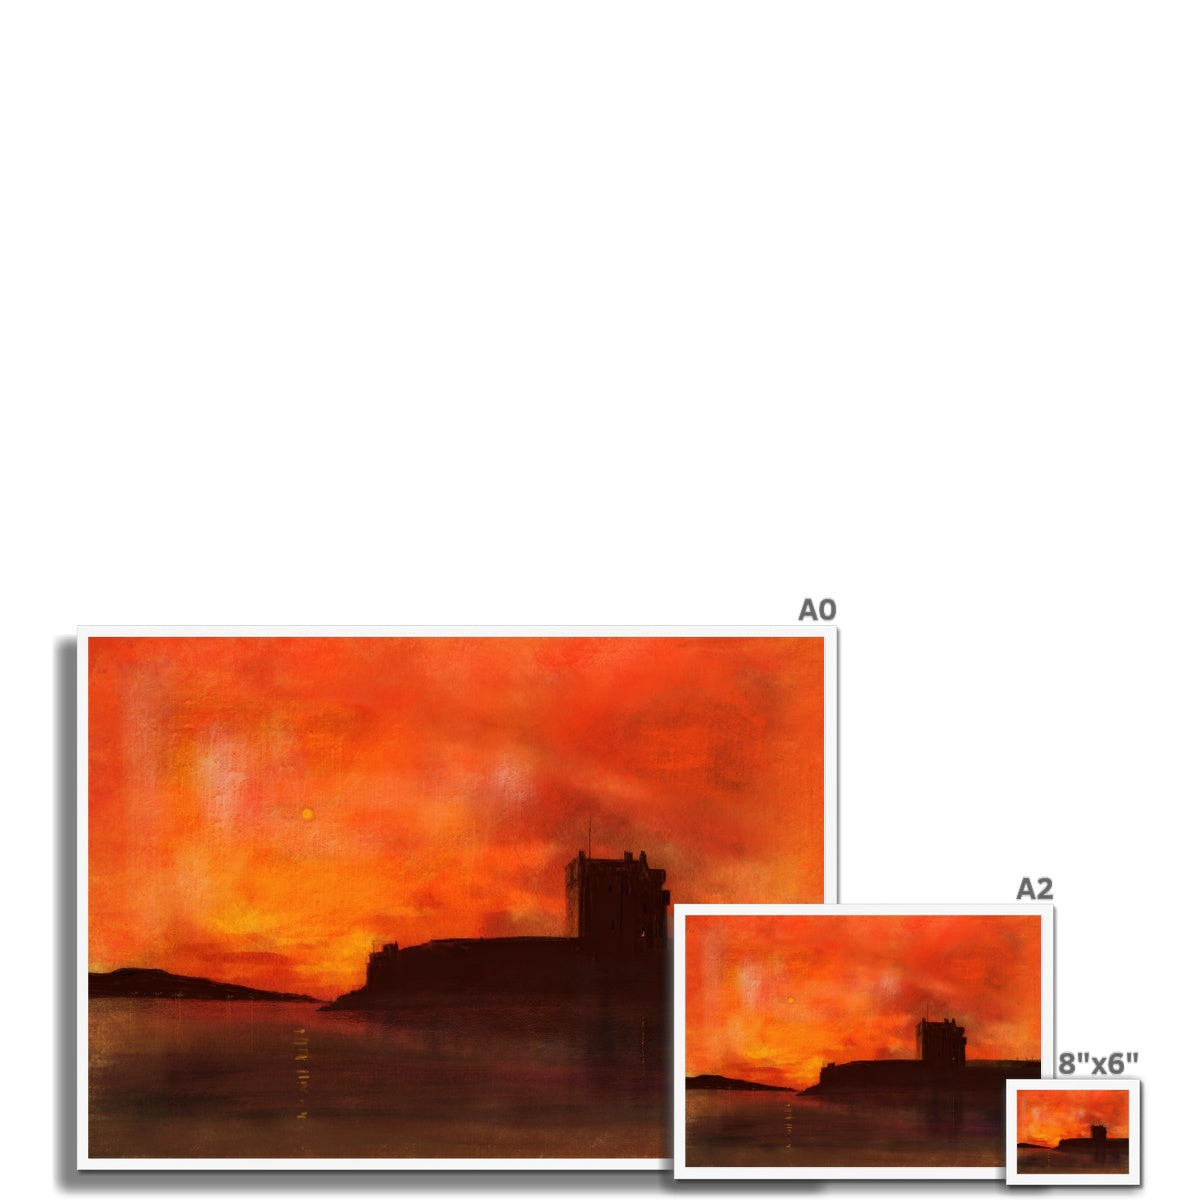 Broughty Castle Sunset Painting | Framed Prints From Scotland-Framed Prints-Scottish Castles Art Gallery-Paintings, Prints, Homeware, Art Gifts From Scotland By Scottish Artist Kevin Hunter